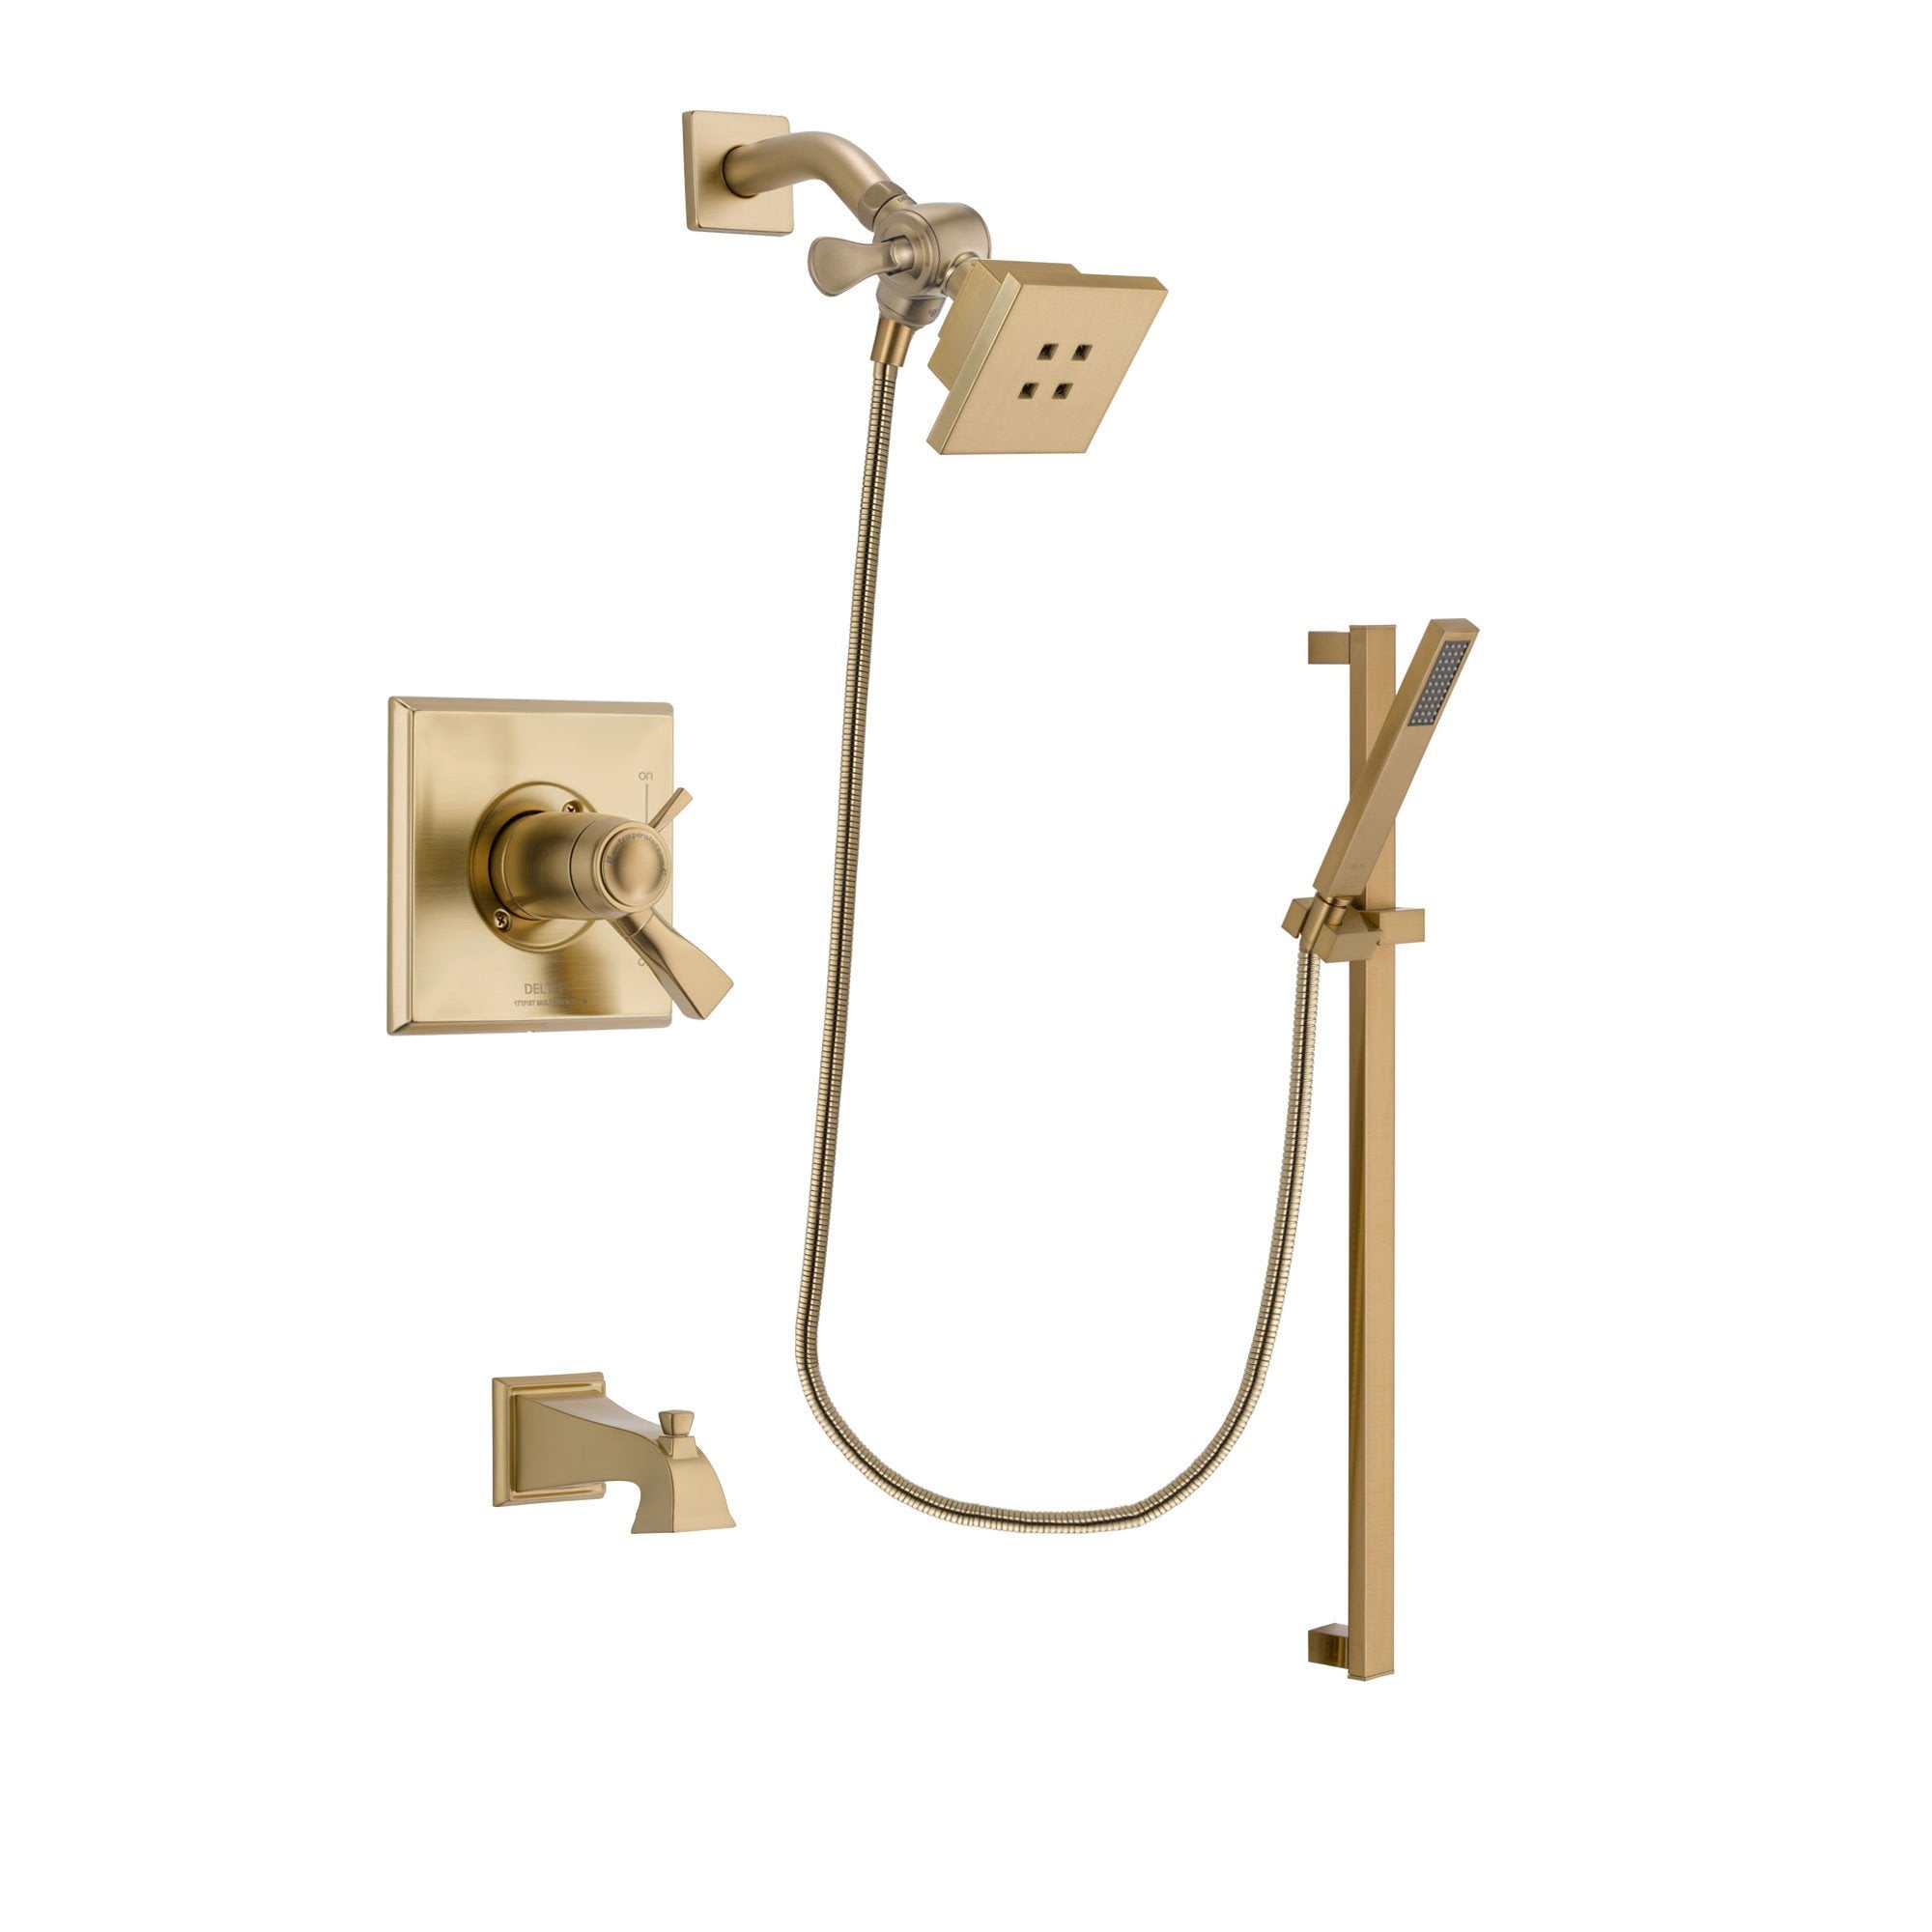 Delta Dryden Champagne Bronze Finish Thermostatic Tub and Shower Faucet System Package with Square Showerhead and Modern Handheld Shower with Square Slide Bar Includes Rough-in Valve and Tub Spout DSP3981V